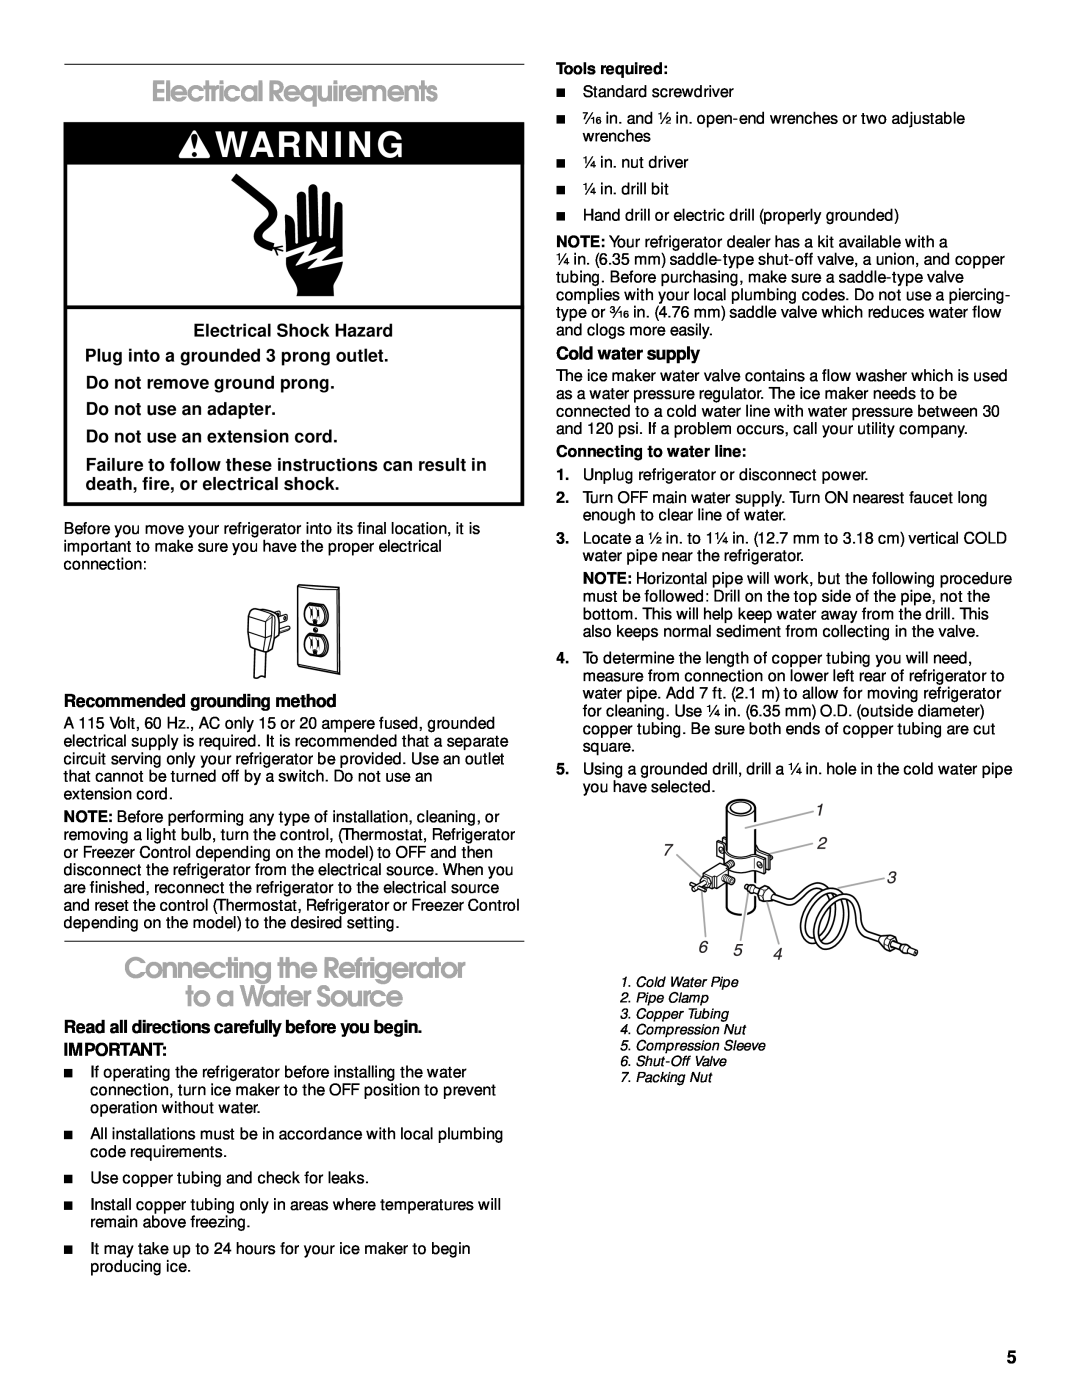 Crosley 2212430 manual Electrical Requirements, Connecting the Refrigerator to a Water Source, Do not use an extension cord 